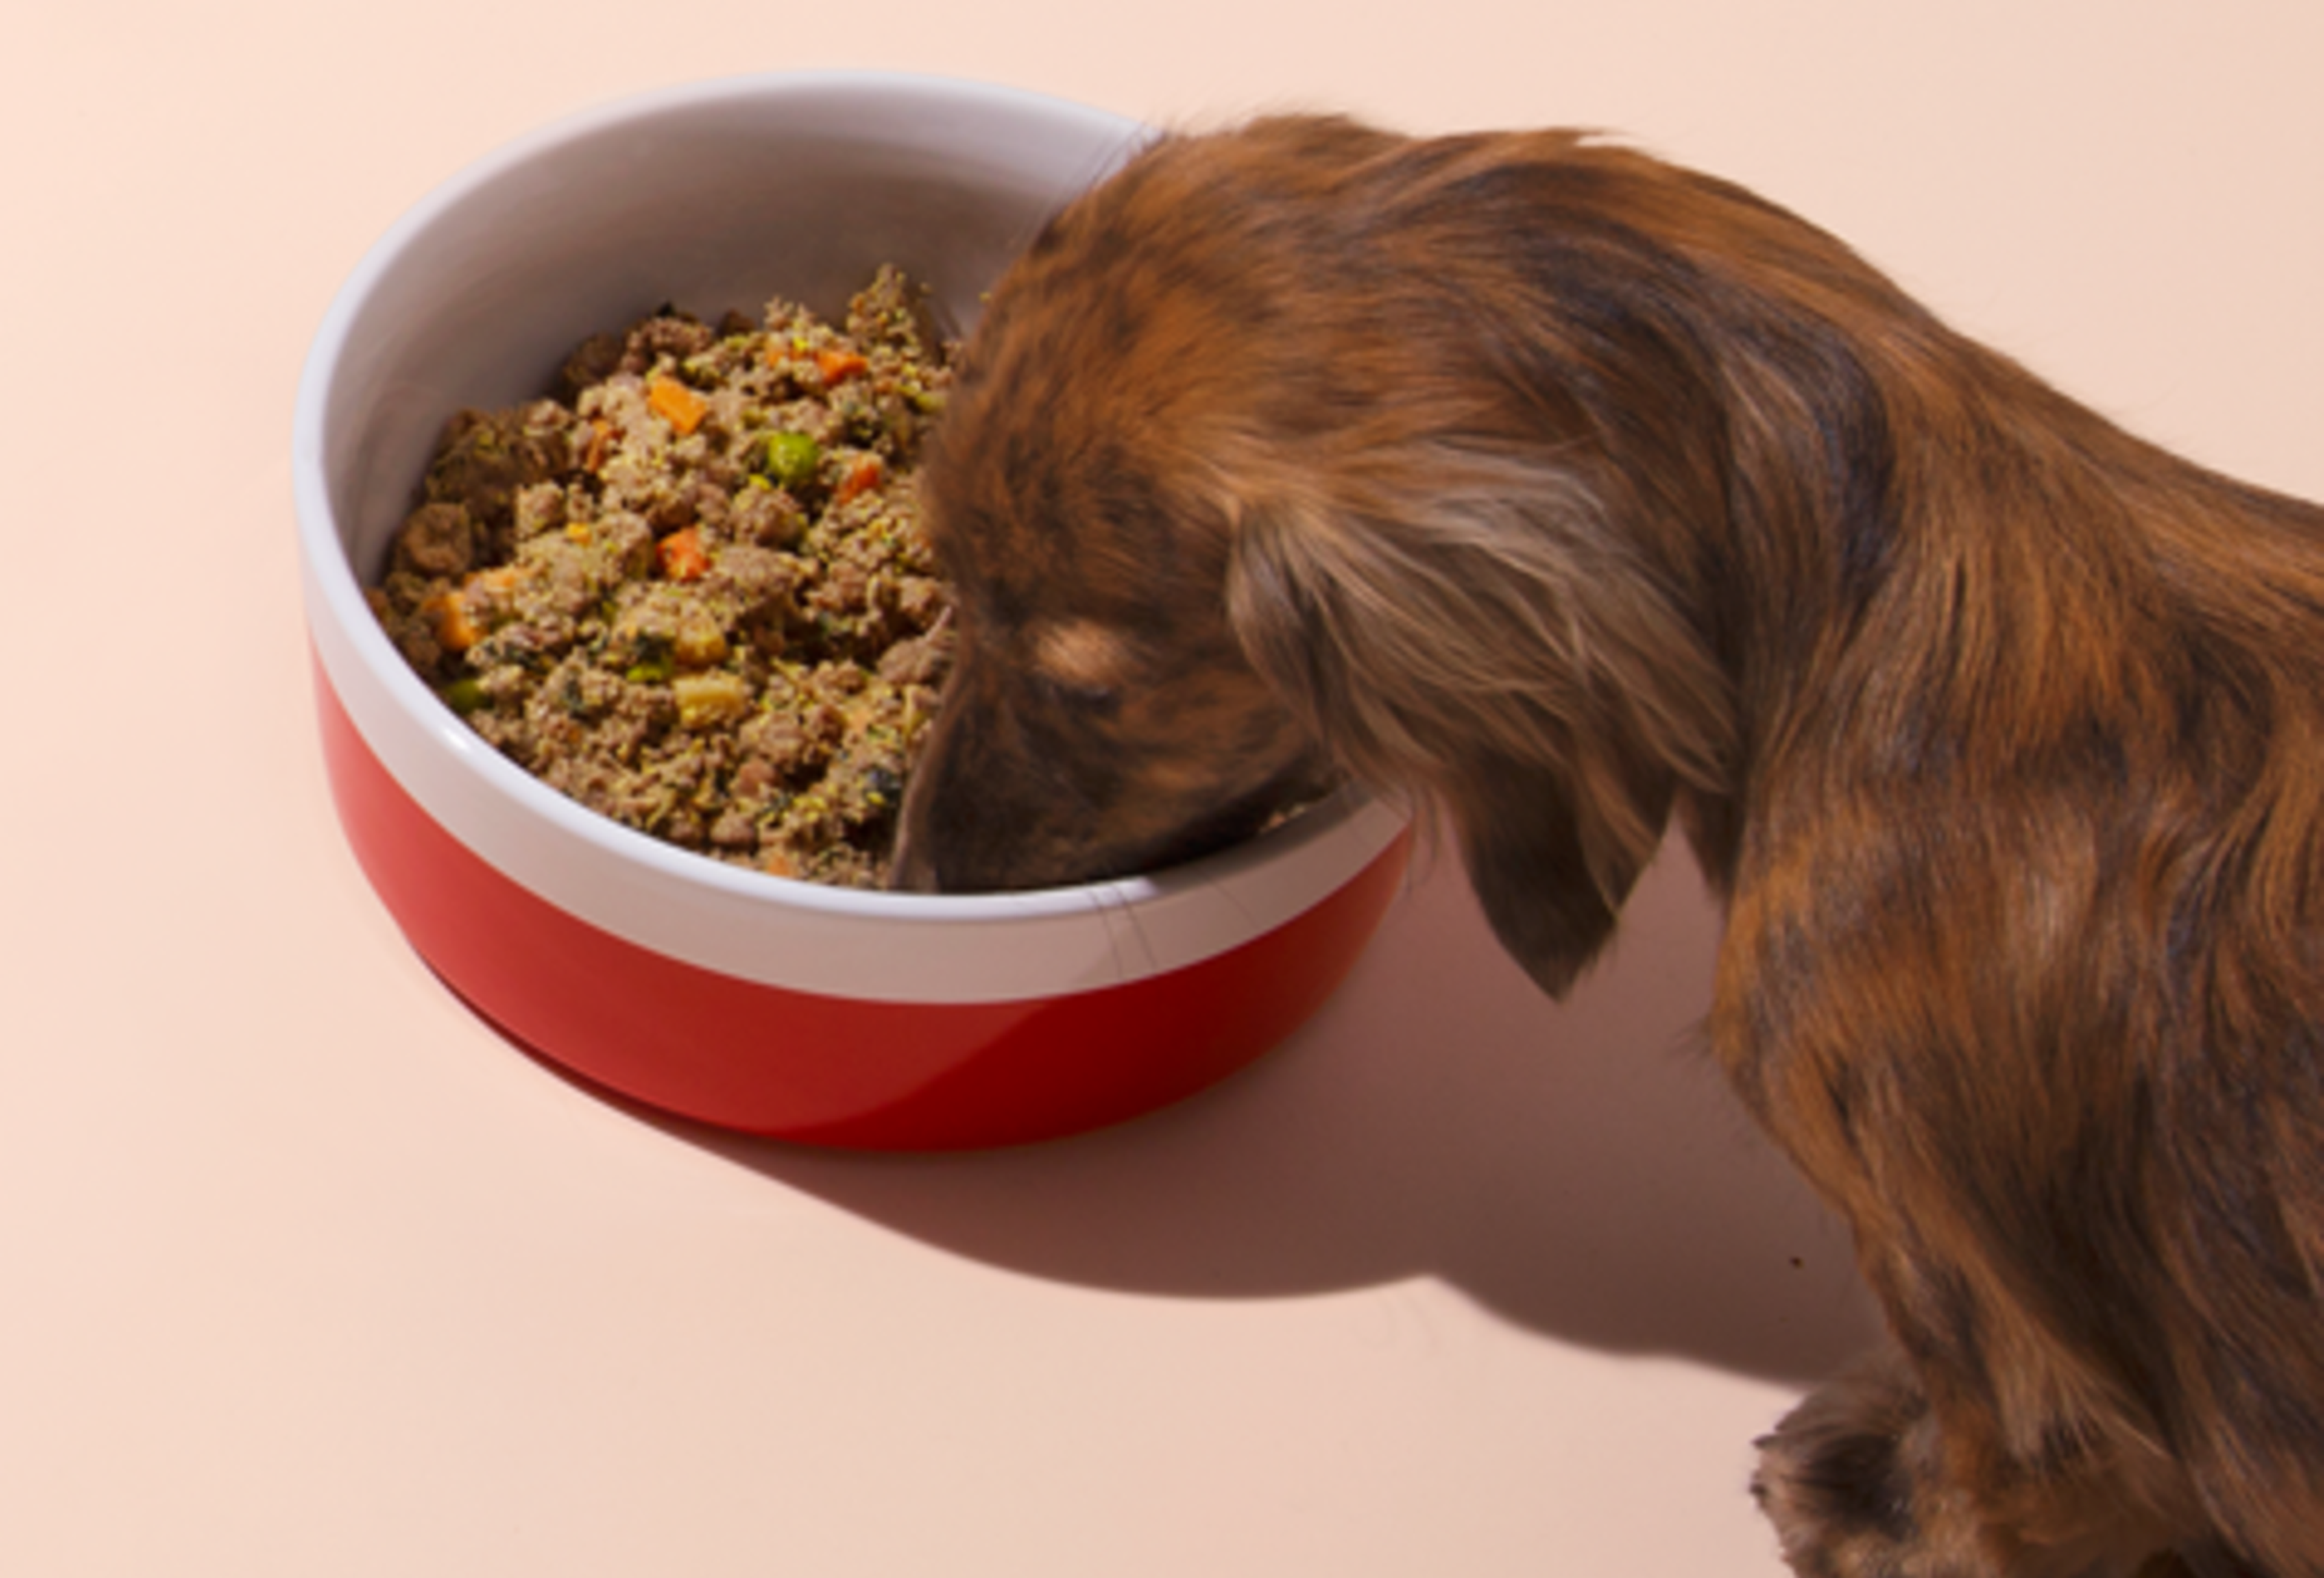 Dog eating Ollie fresh food out of a bowl